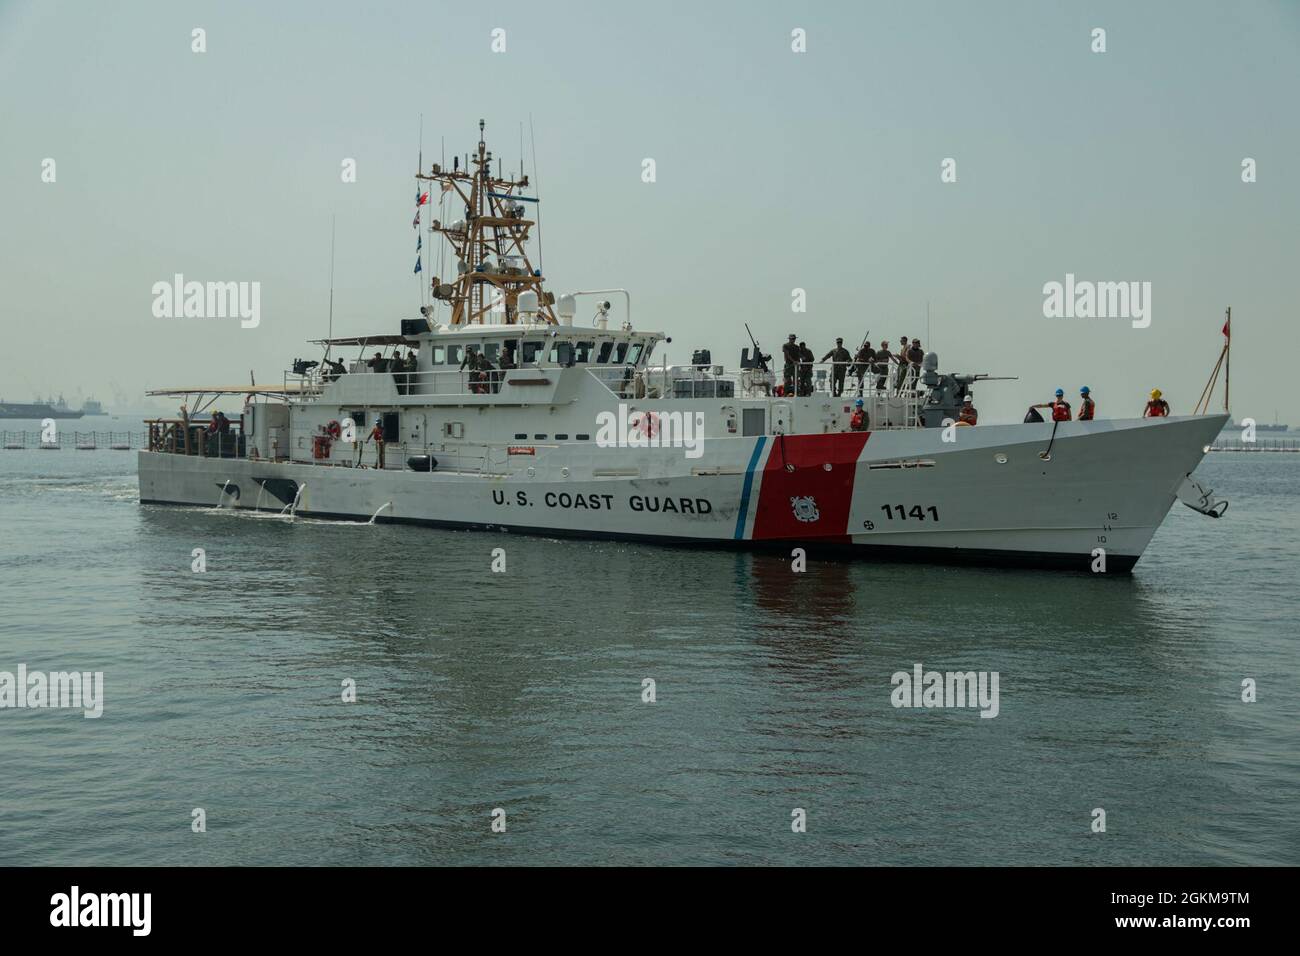 210525-A-IY623-0039 GULF OF BAHRAIN (May 25, 2021) – U.S. Coast Guard fast  response cutter USCGC Charles Moulthrope (WPC 1141) transits the Gulf of  Bahrain, en route to its new homeport at Naval